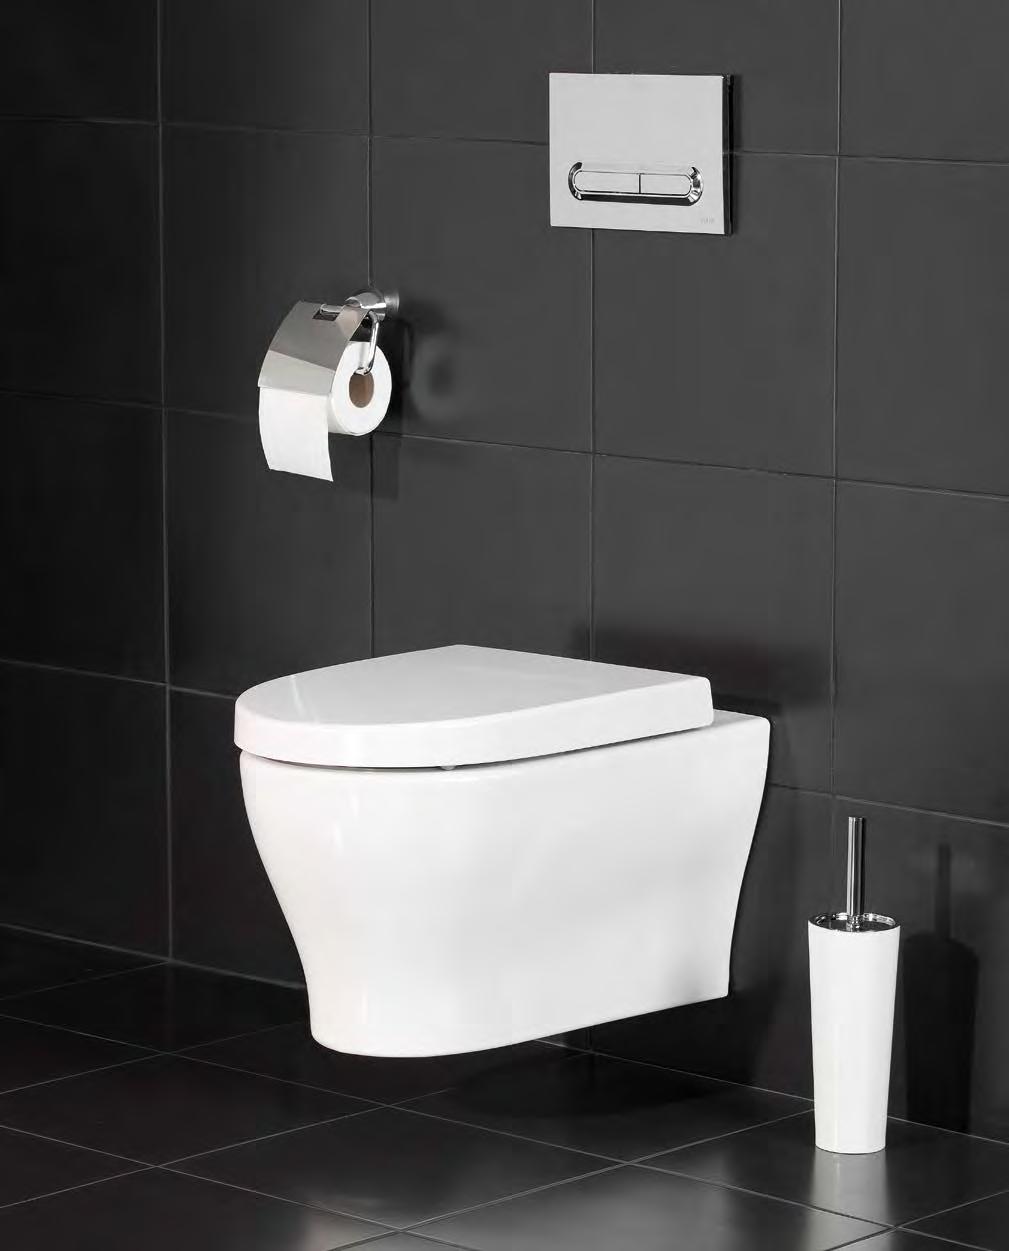 CONNECT TO THE WALL USING A CONCEALED MOUNTING SYSTEM THE SENTO WALL-HUNG PAN IS NOW AVAILABLE WITH RIM-EX TECHNOLOGY IN BOTH